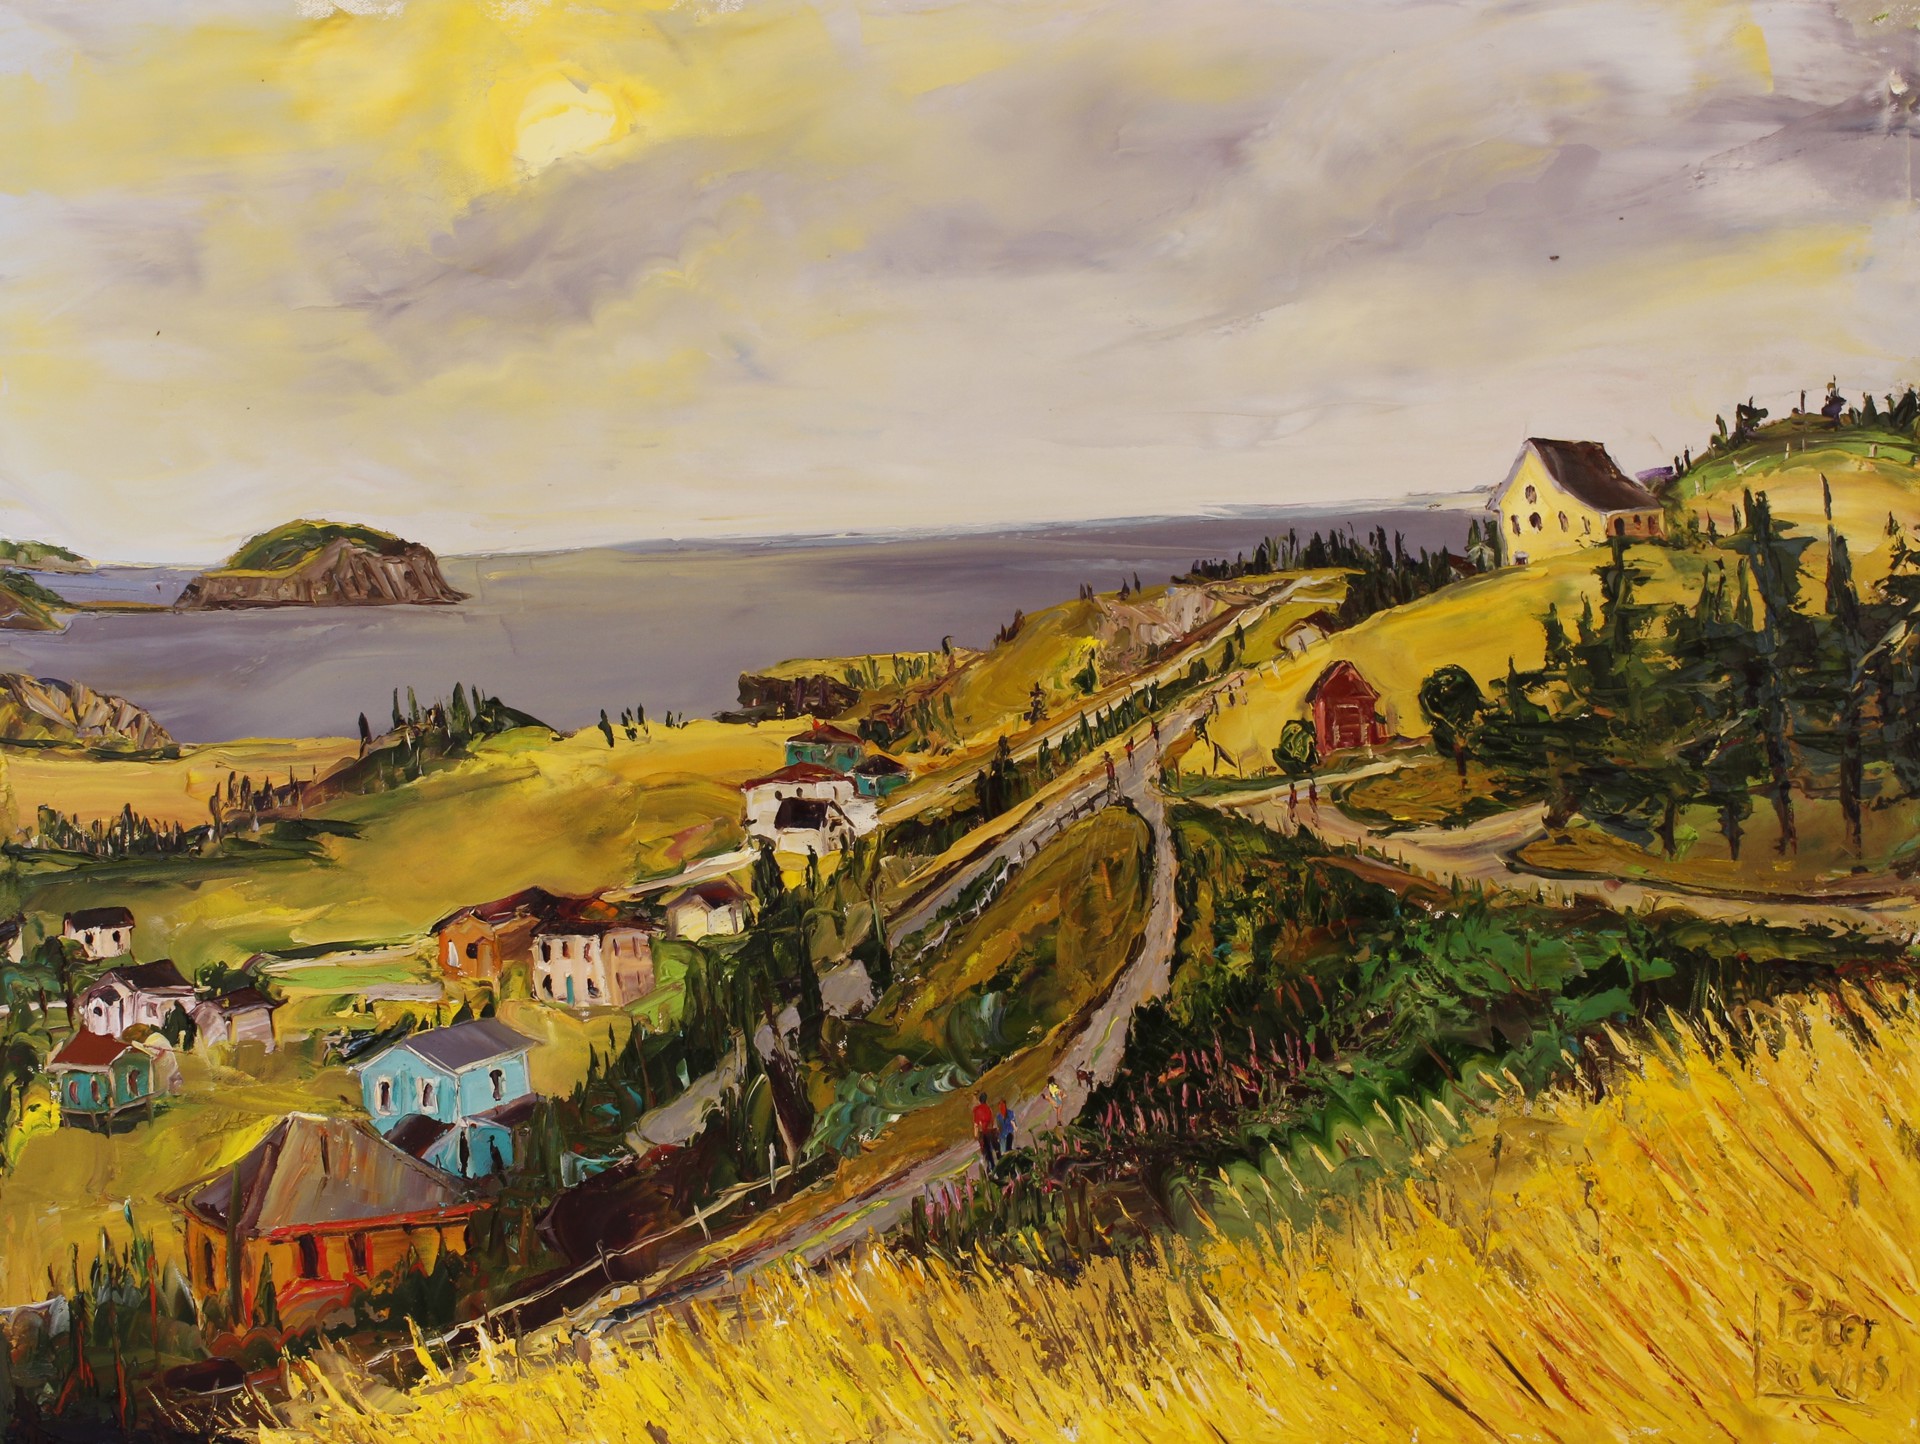 Skerwink Trail, Port Rexton by Peter Lewis